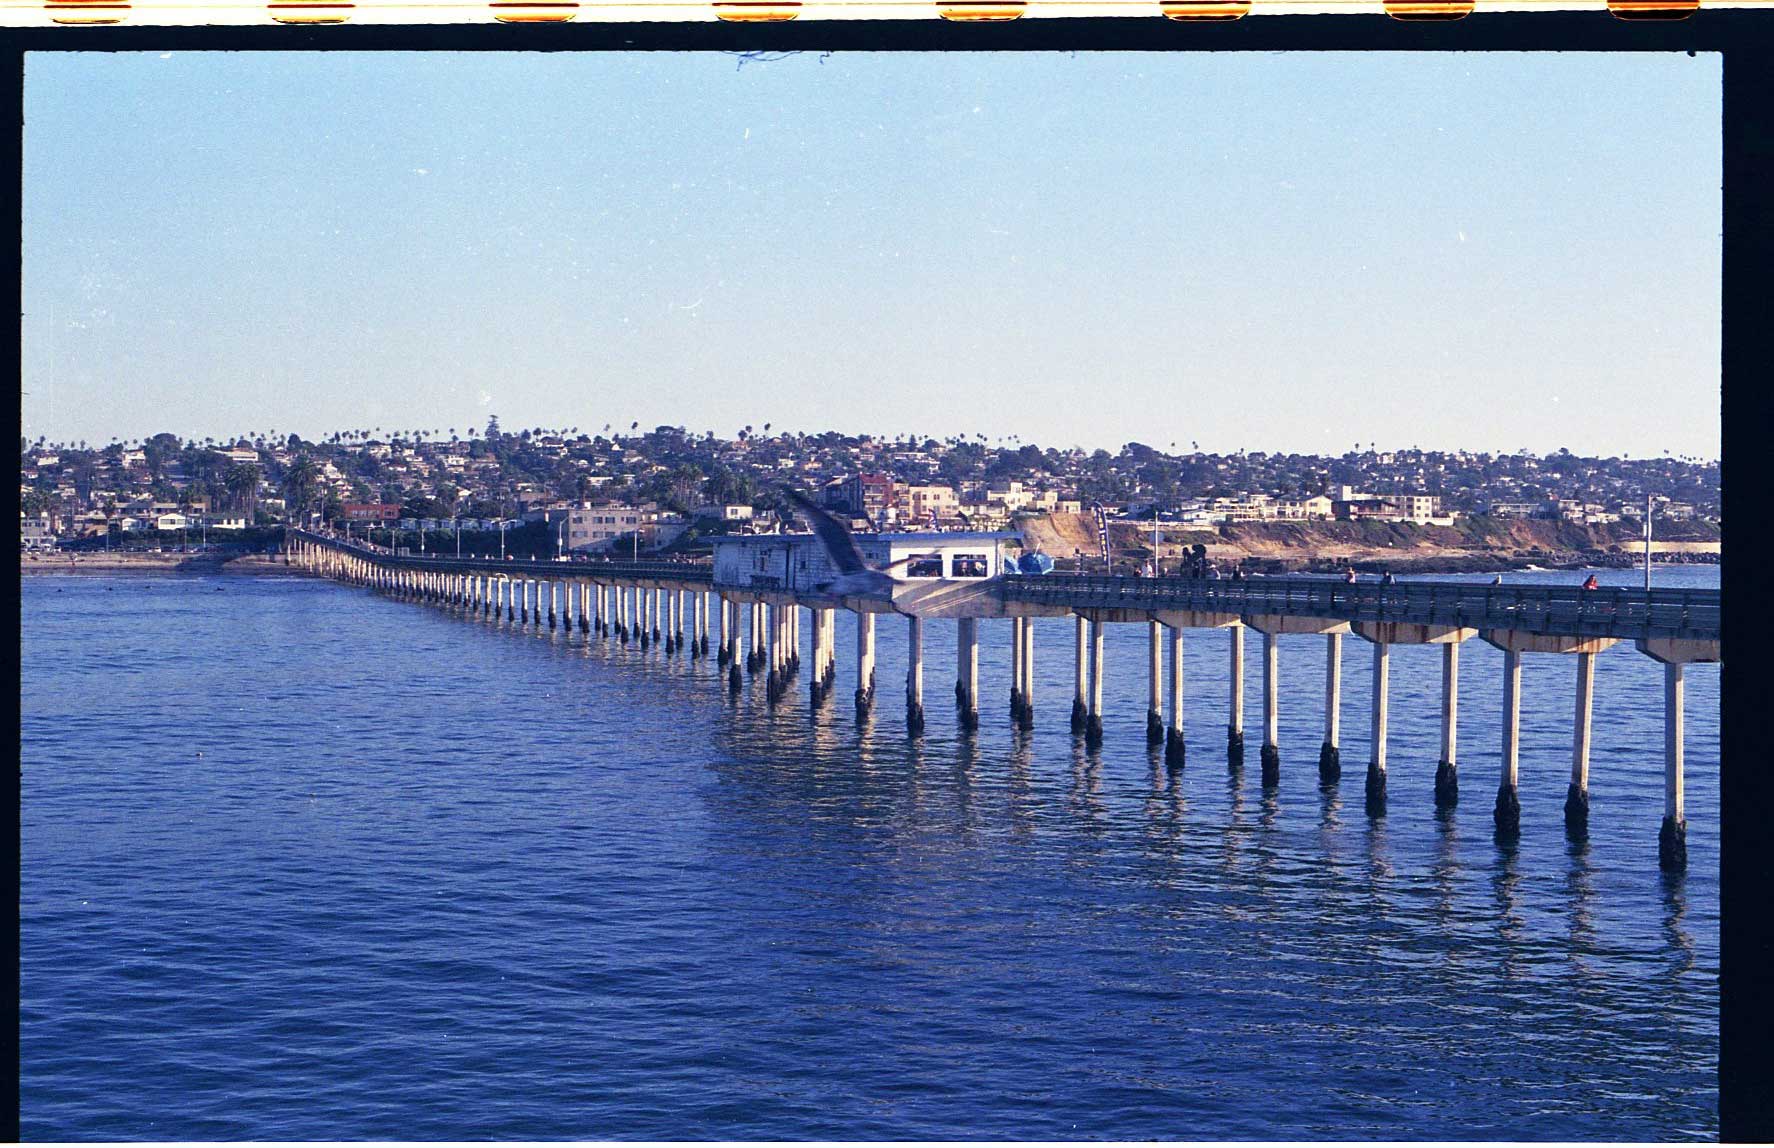 Pier stretching across the water